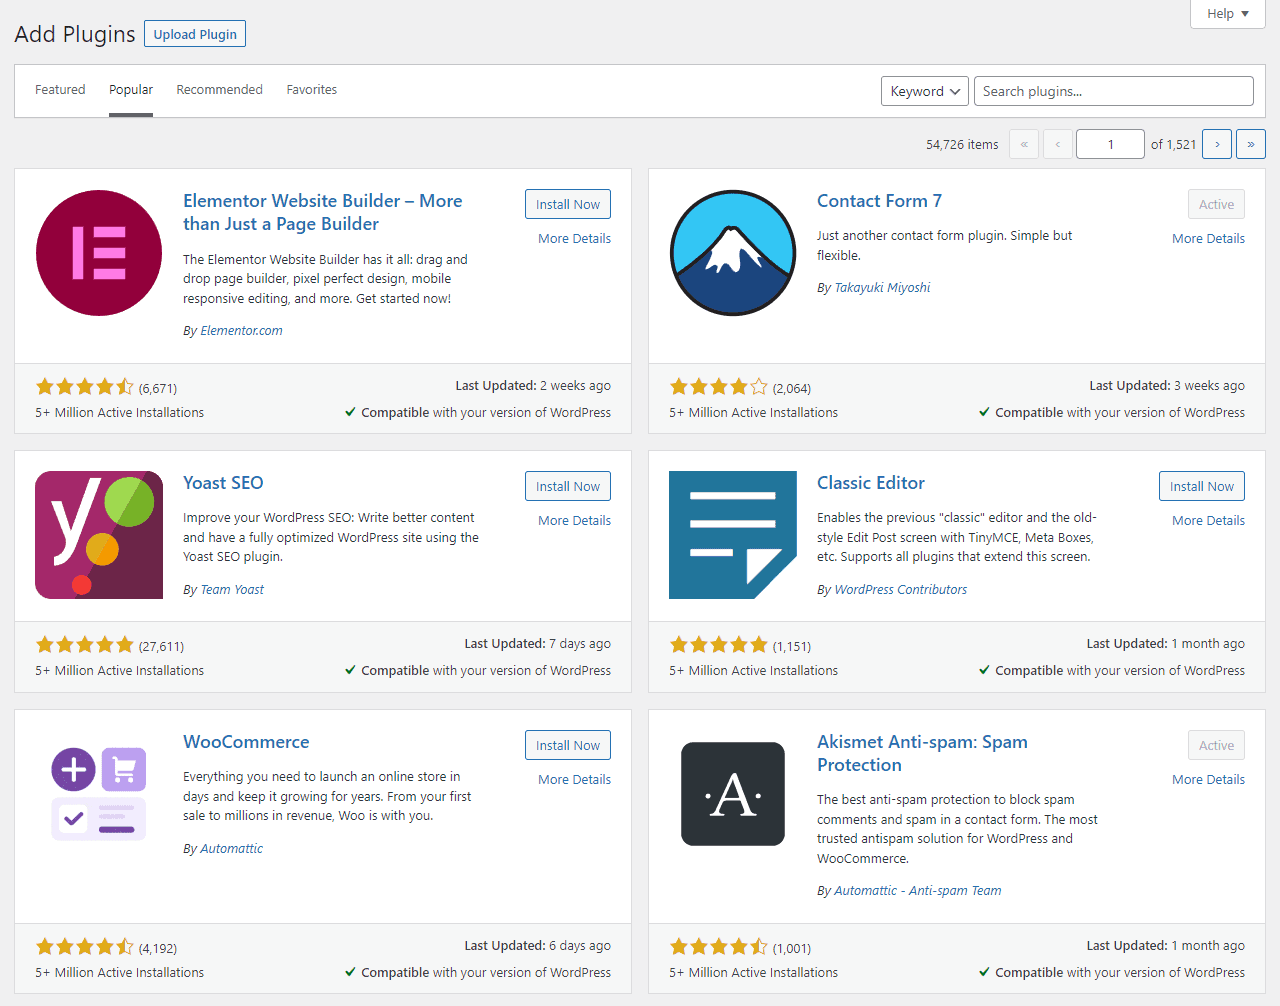 Popular WP Plugins - How Many Plugins Should You Use?